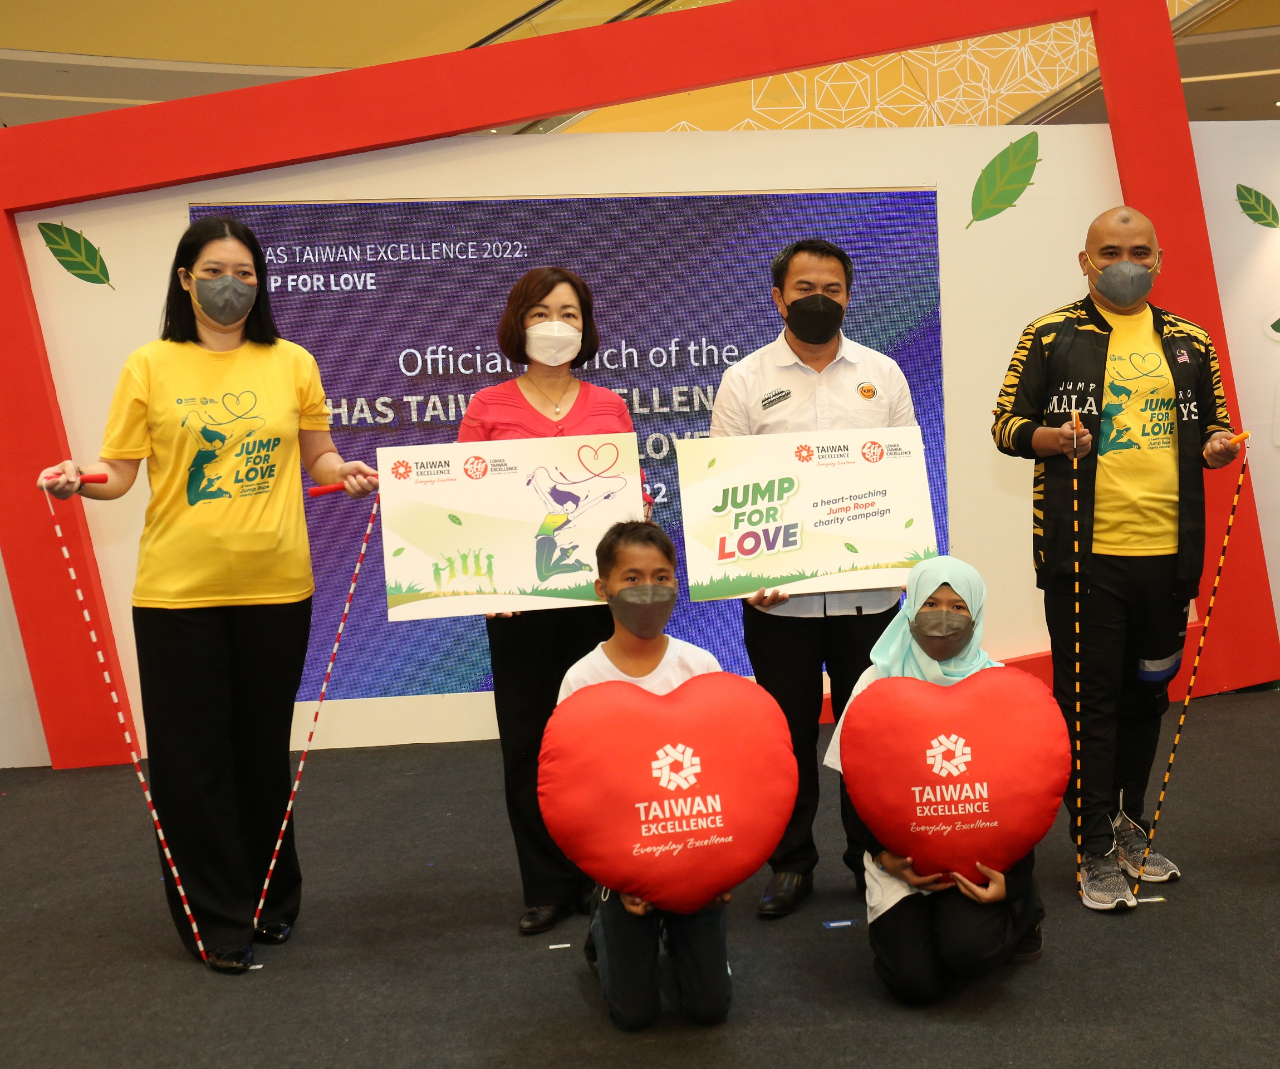 The event was jointly unveiled by Representative Anne Hung, Mr. Halman Salleh, Deputy Director of Sports Division, Kuala Lumpur Youth and Sports Department, Mr. Hj. Syaiful Anwar Bin Hj. Ishak, President of Malaysian Jump Rope Federation and Ms Eve Peng, Director of Taiwan Trade Center Kuala Lumpur. 

